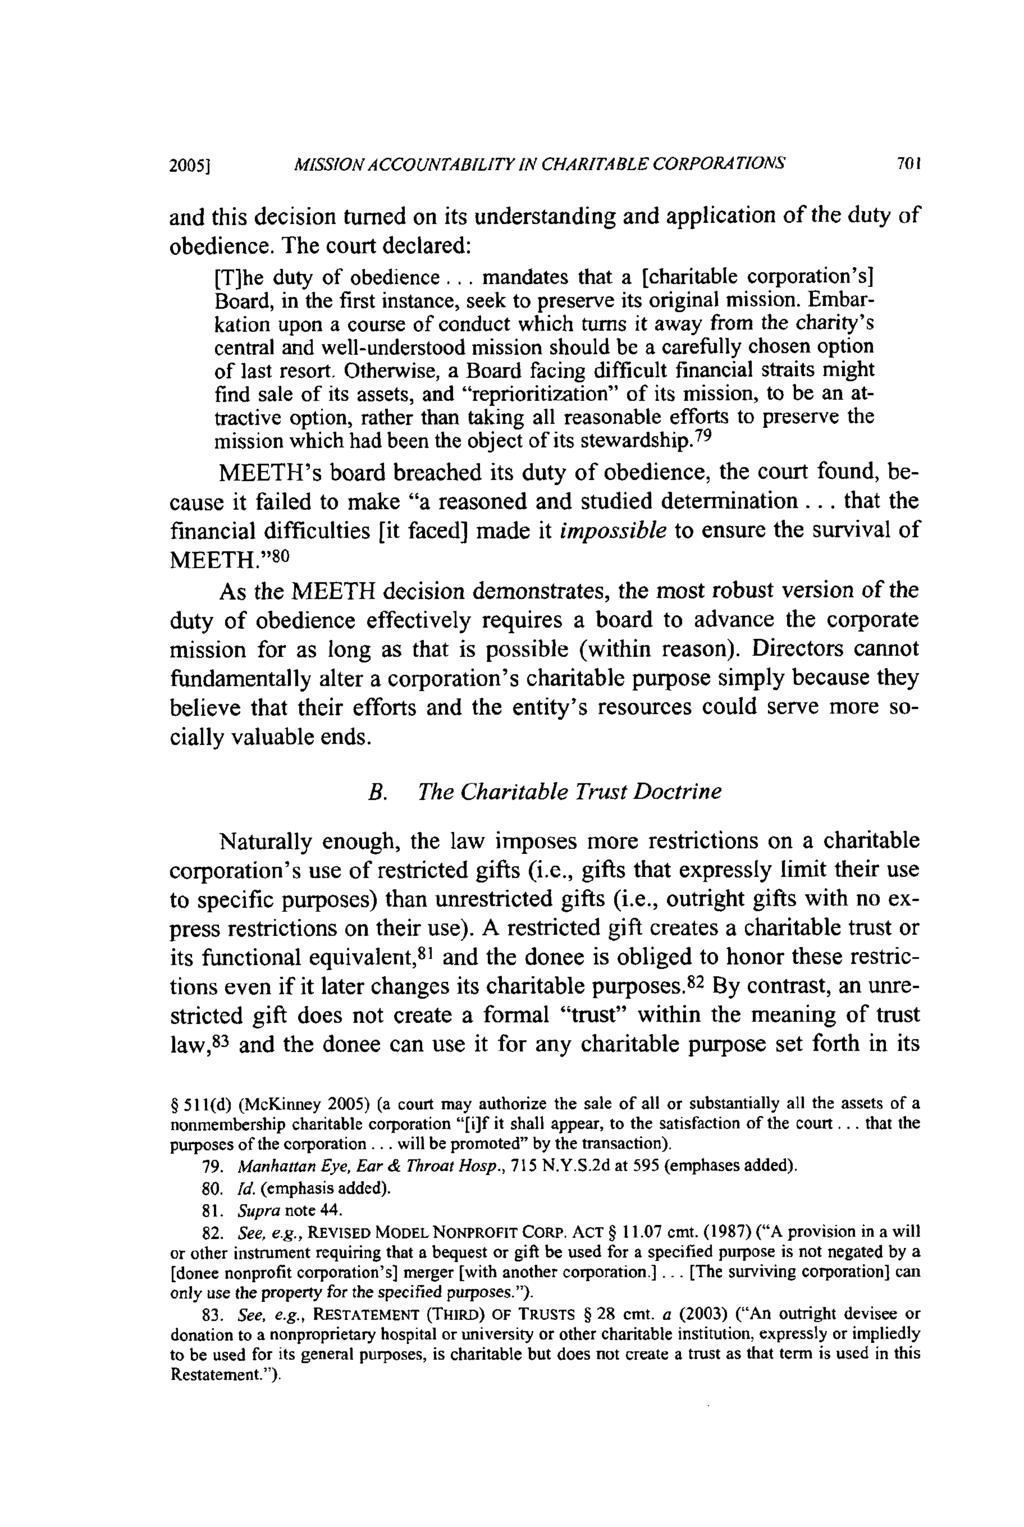 2005] MISSION ACCOUNTABILITY IN CHARITABLE CORPORA TIONS and this decision turned on its understanding and application of the duty of obedience. The court declared: [T]he duty of obedience.